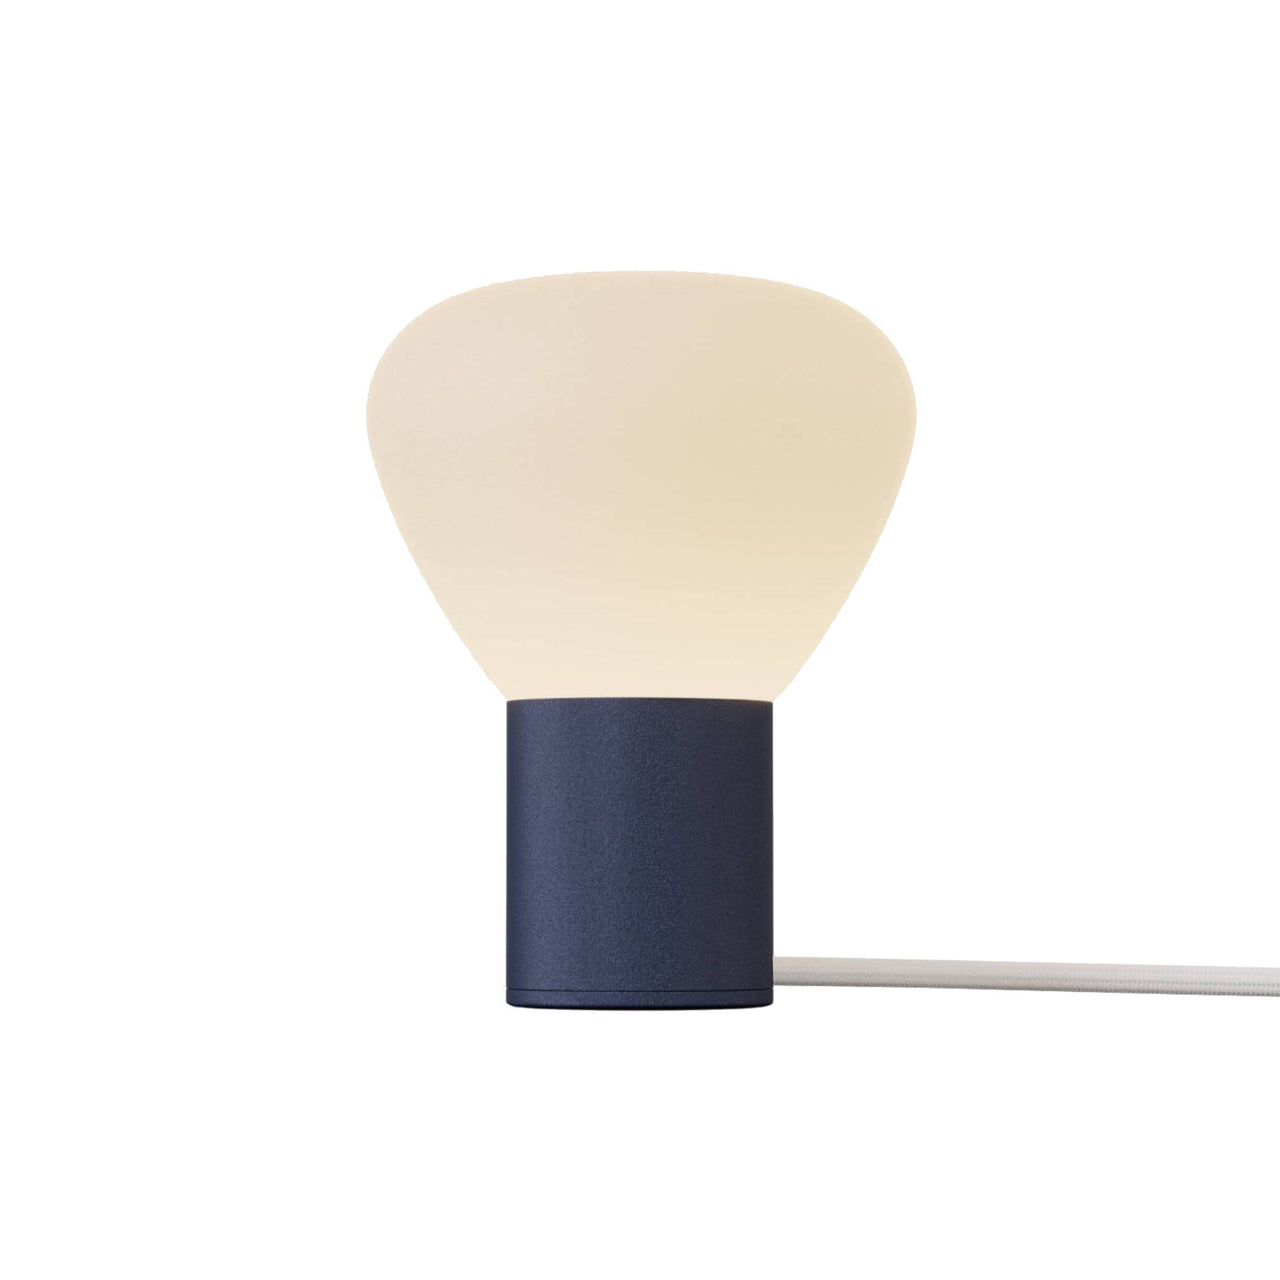 Parc 01 Table Lamp: Handswitch +  Midnight Blue + White